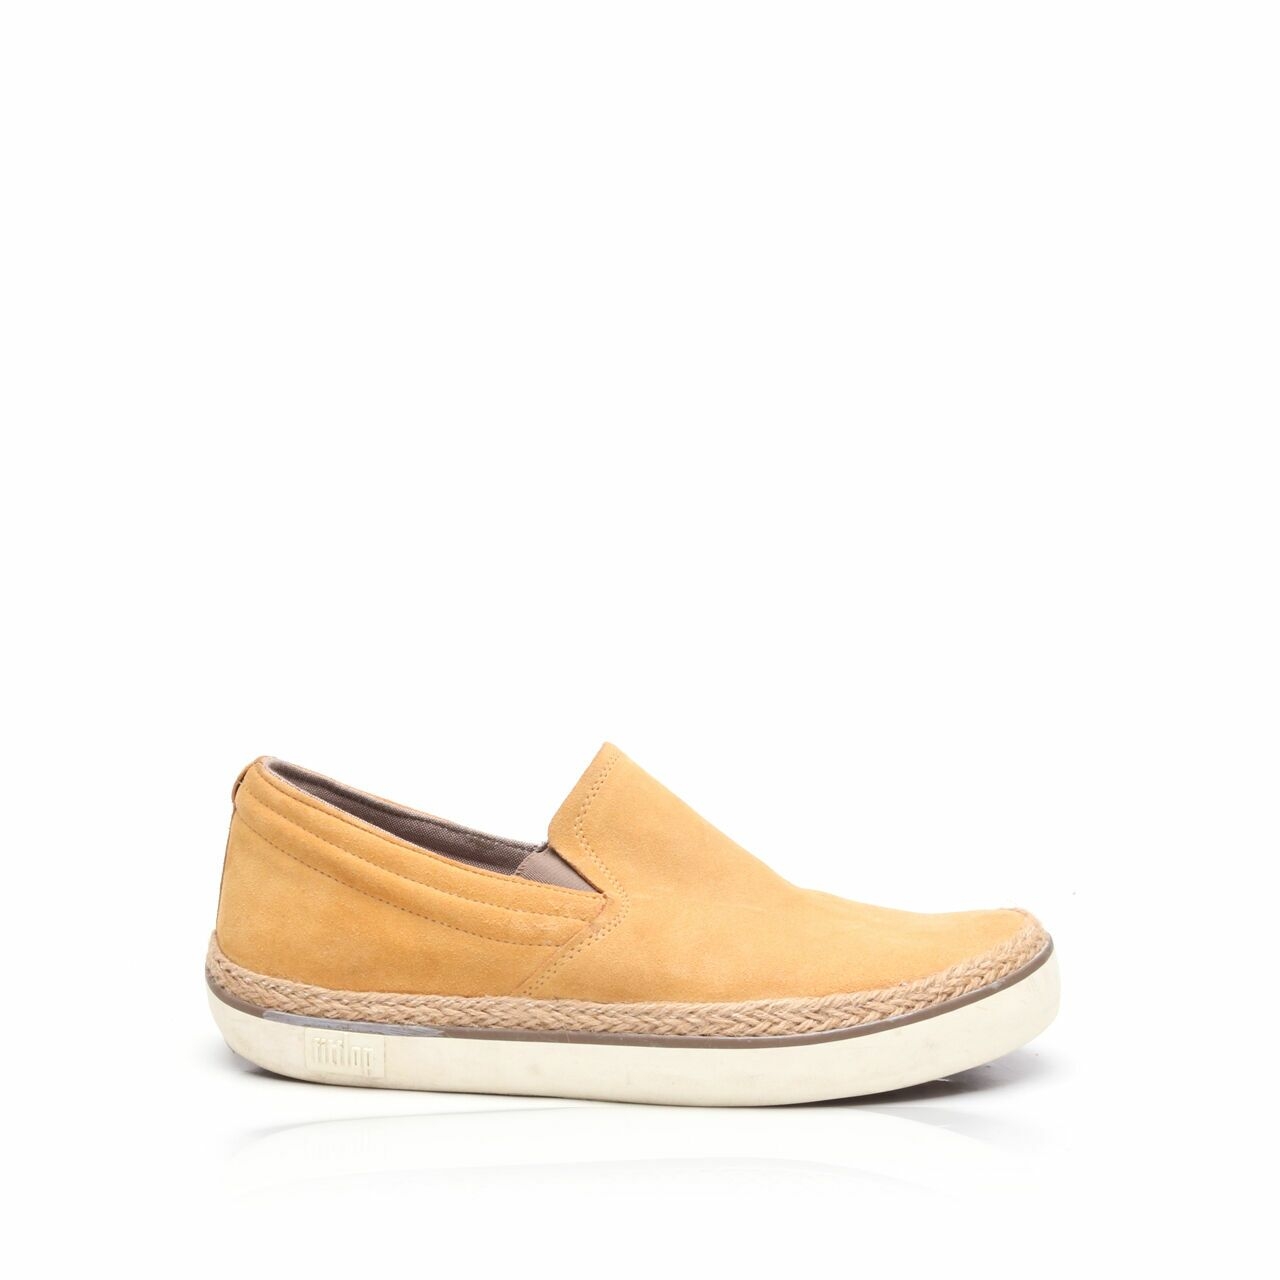 Fitflop Mustard Slippers Sneakers